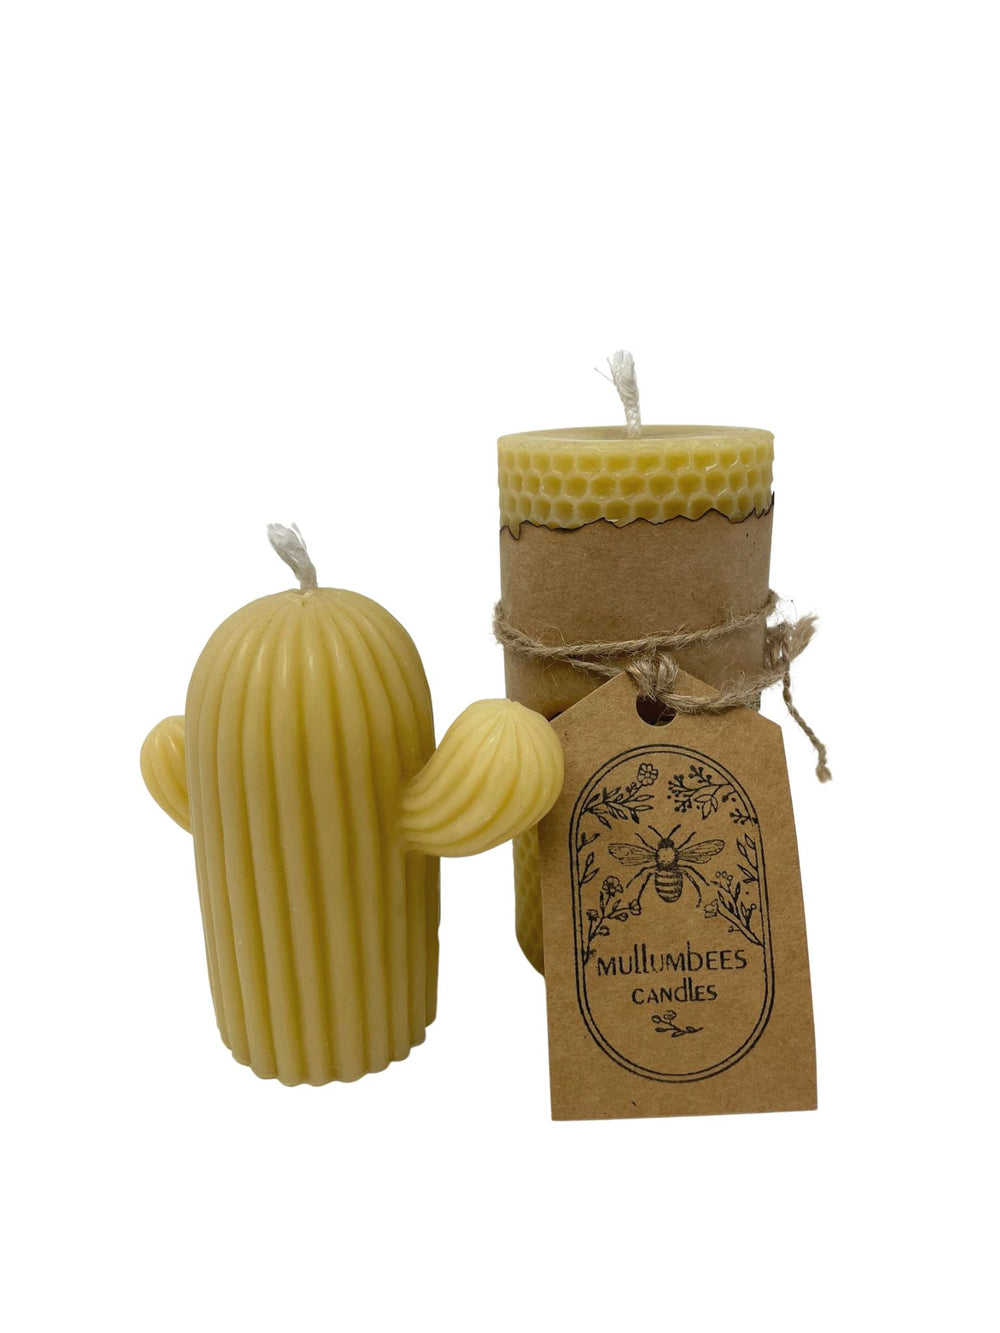 Cactus Mullumbees Candles